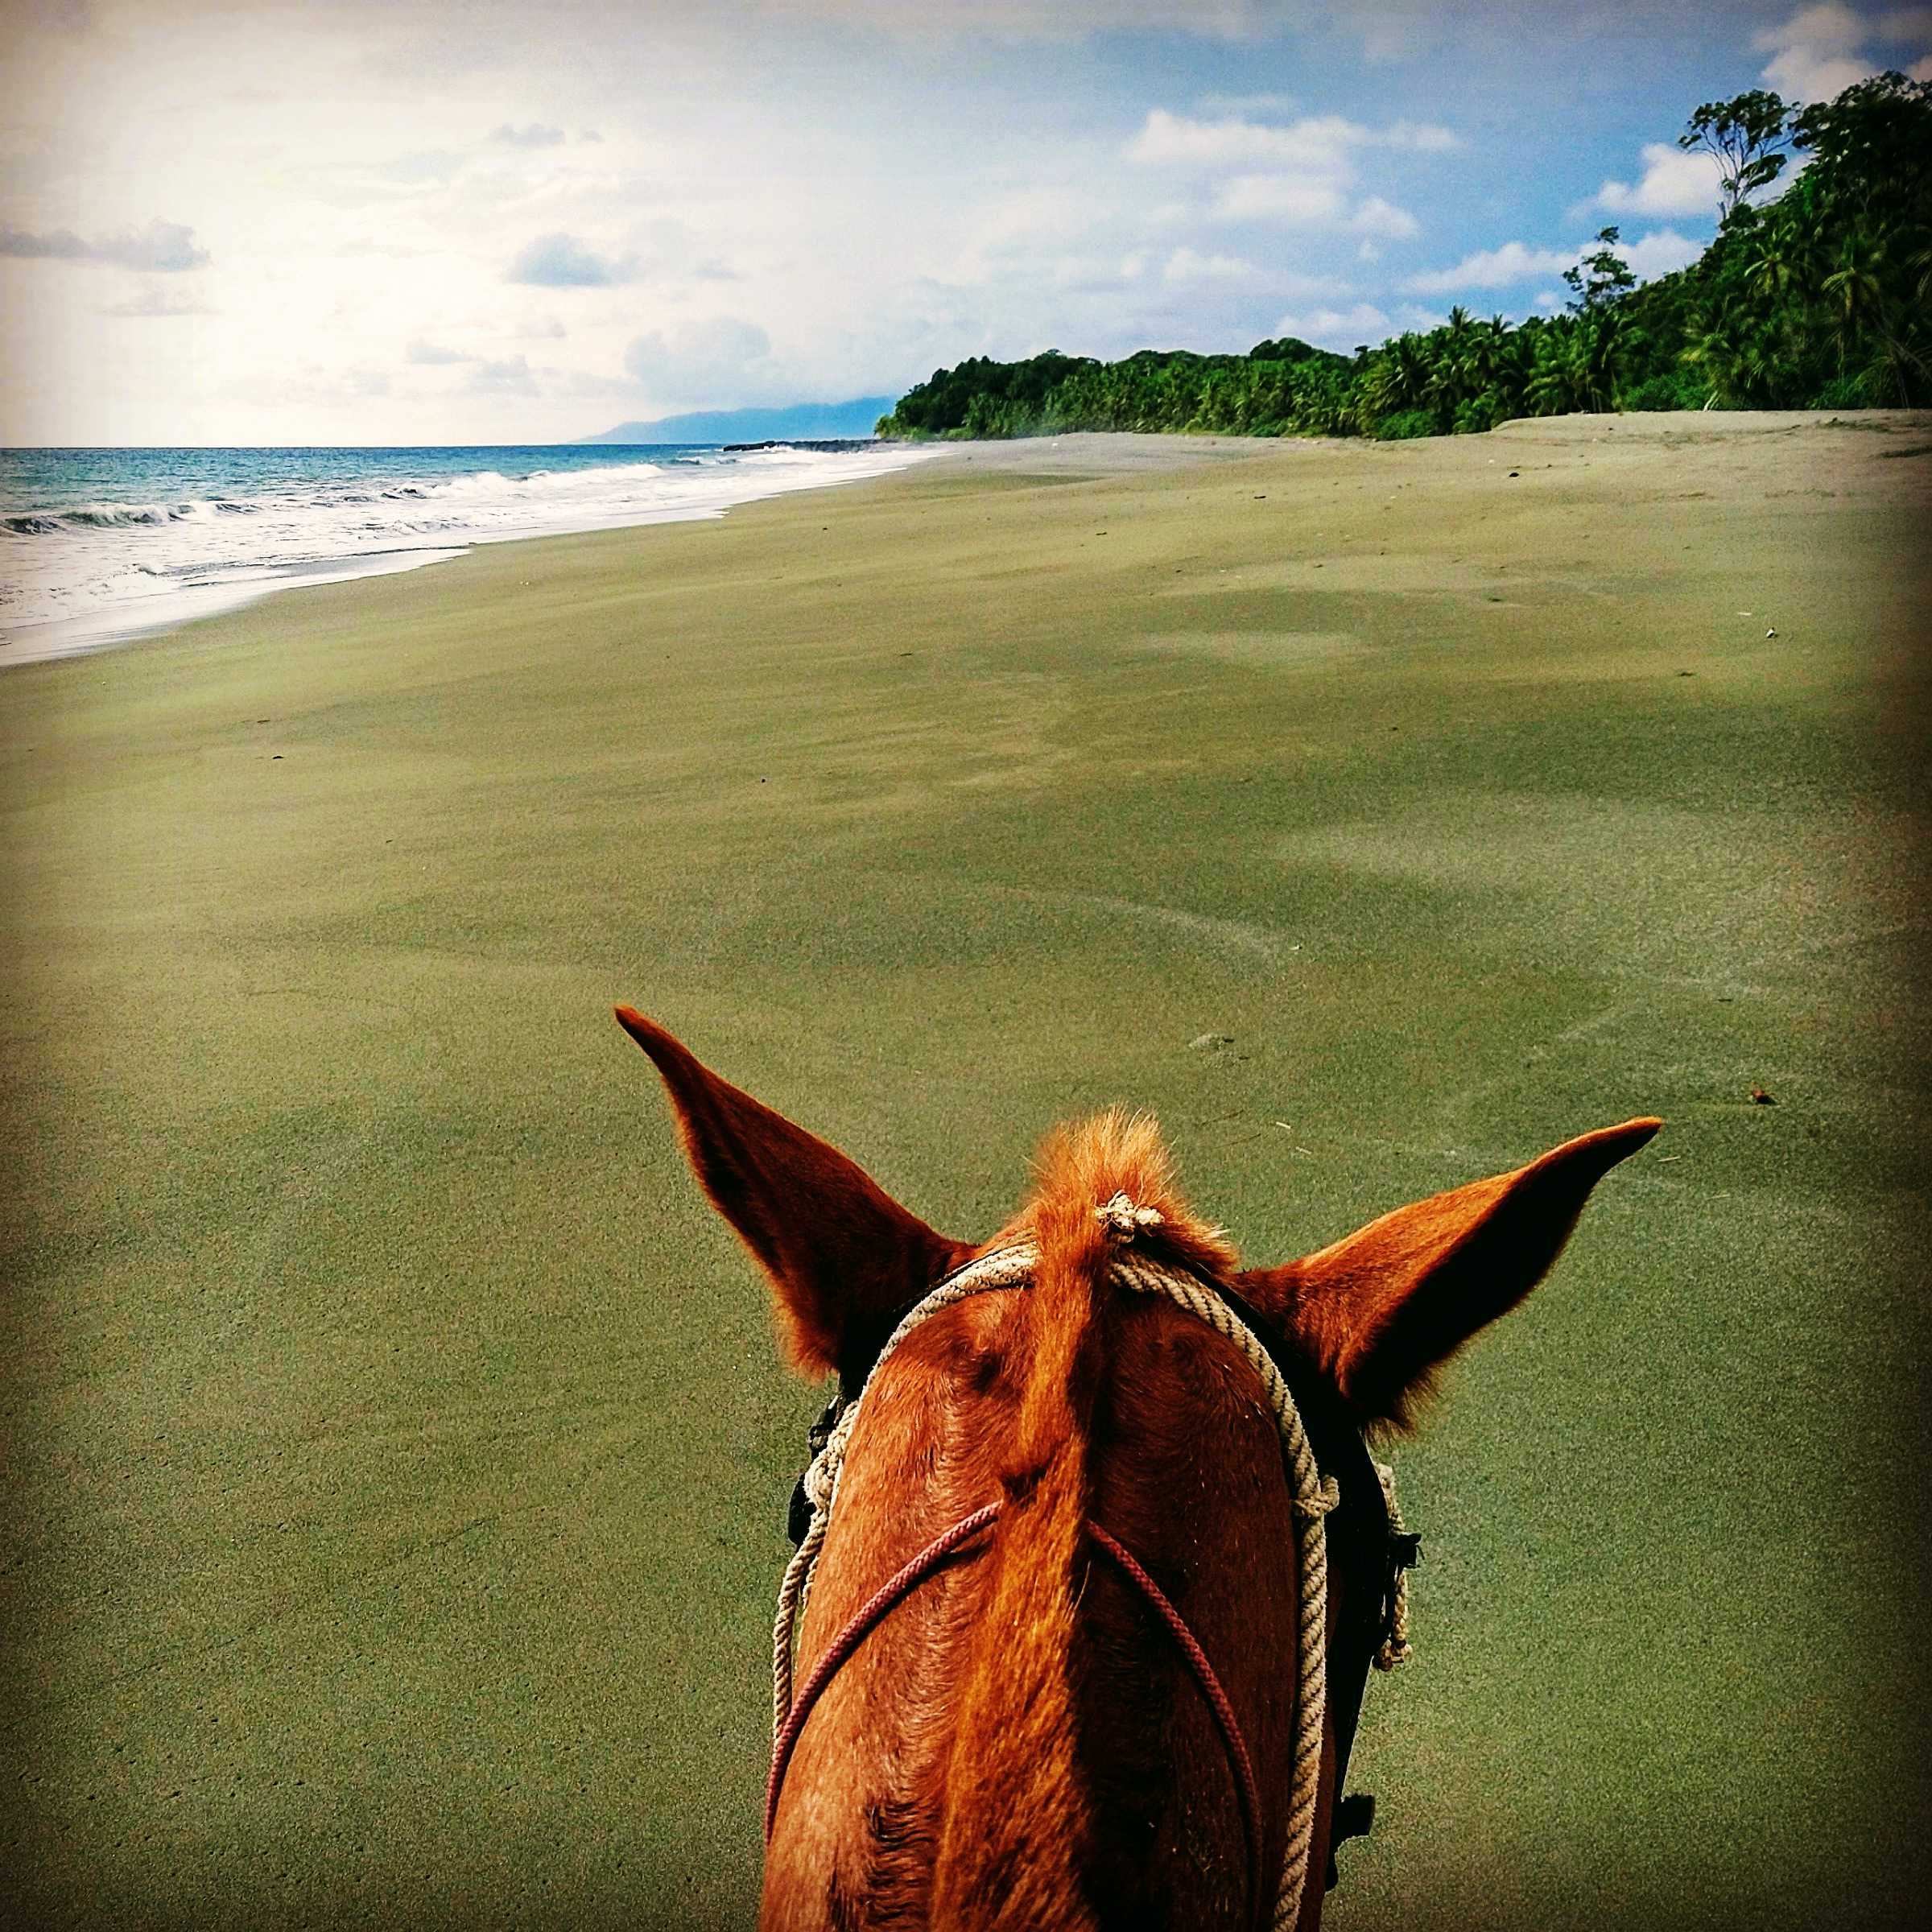 A person horseriding in an empty beach